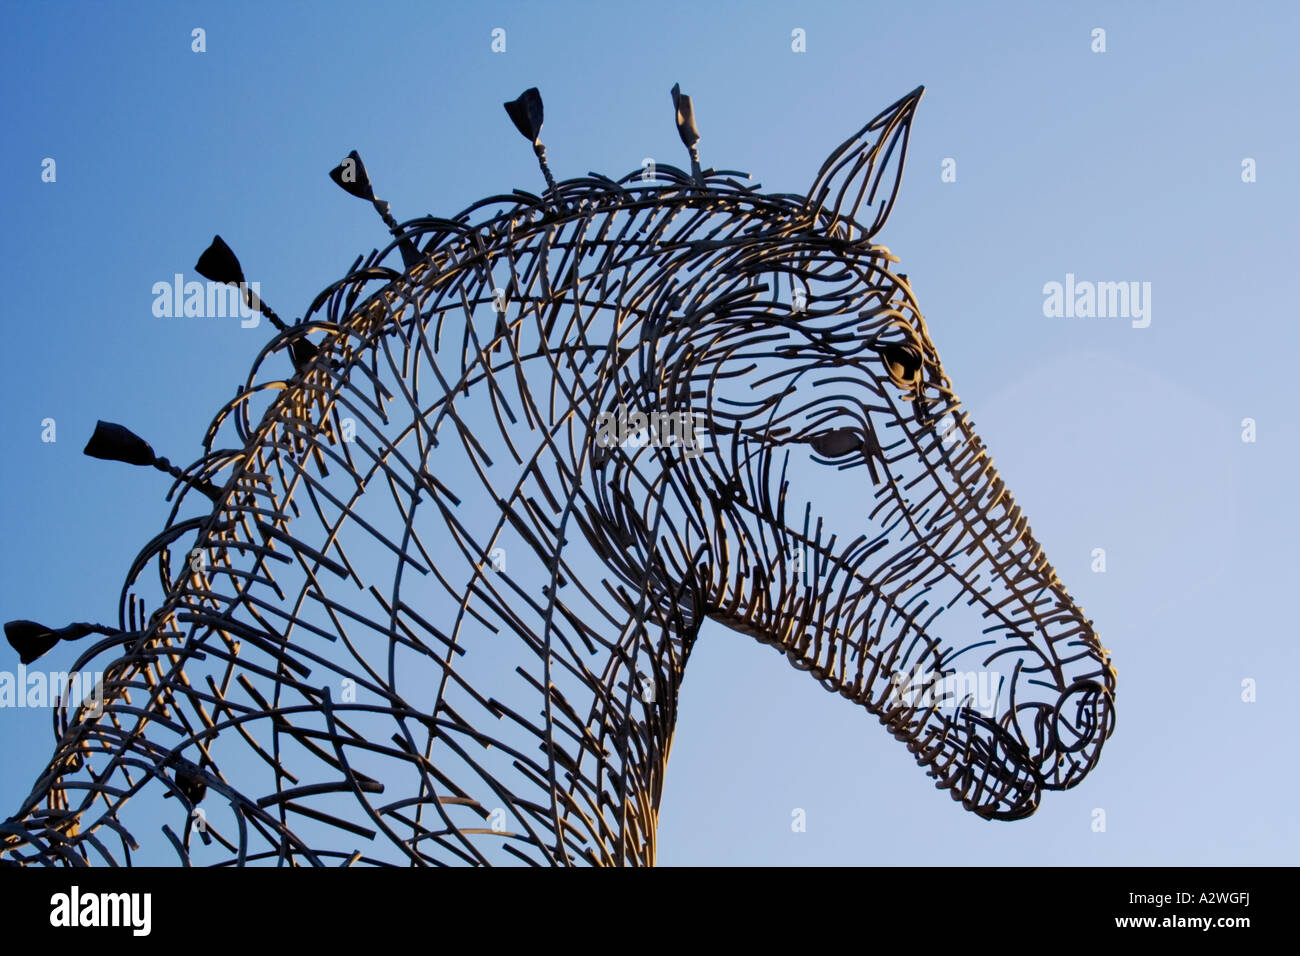 Andy Scott's magnificent Sculpture of a Clydesdale horse entitled Heavy Horse, Glasgow next to the M8 motorway, Scotland. Stock Photo